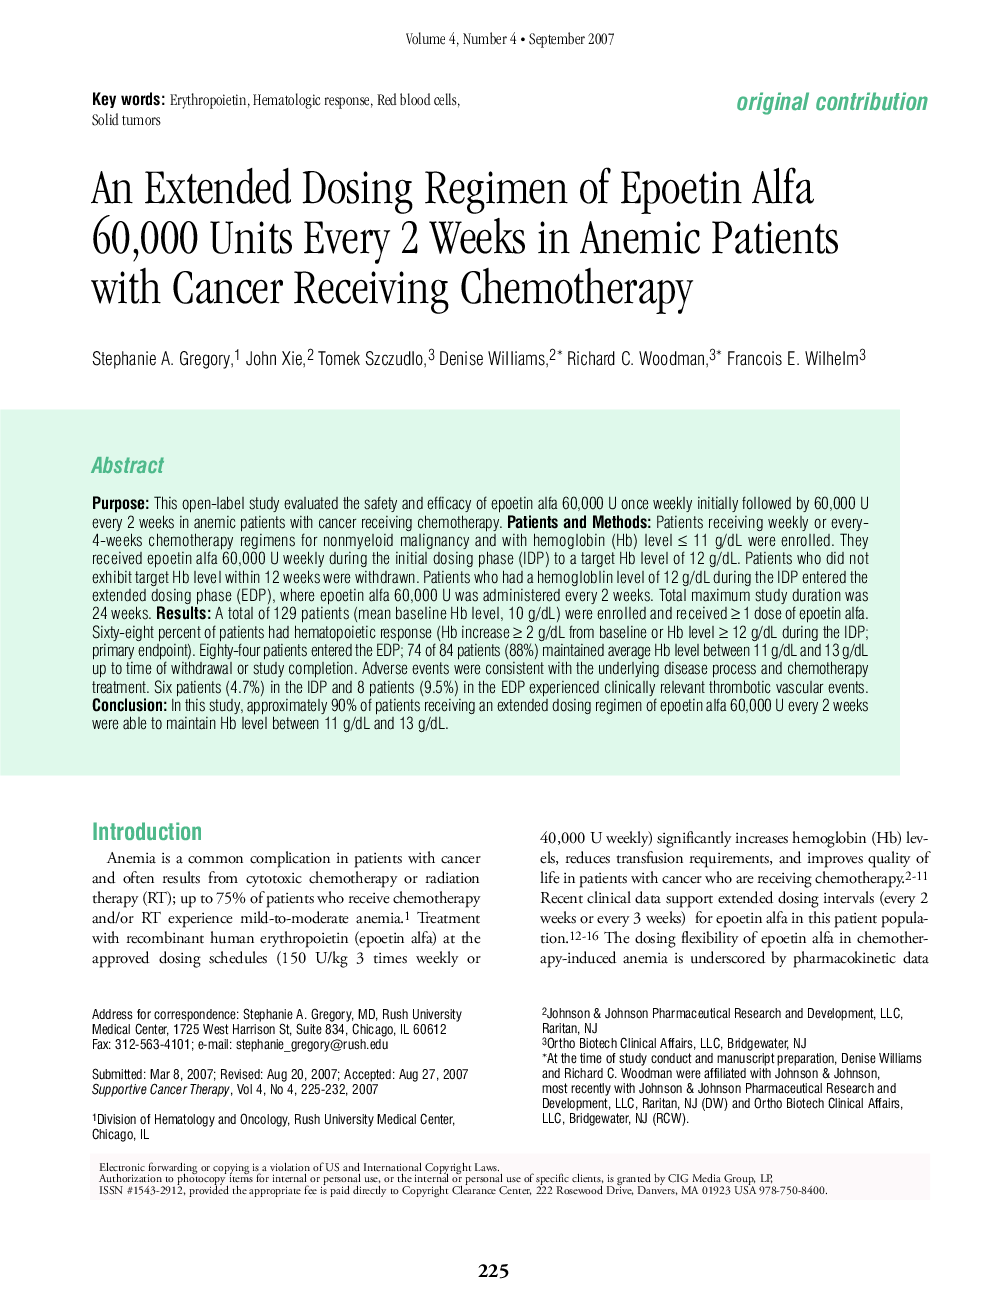 An Extended Dosing Regimen of Epoetin Alfa 60,000 Units Every 2 Weeks in Anemic Patients with Cancer Receiving Chemotherapy